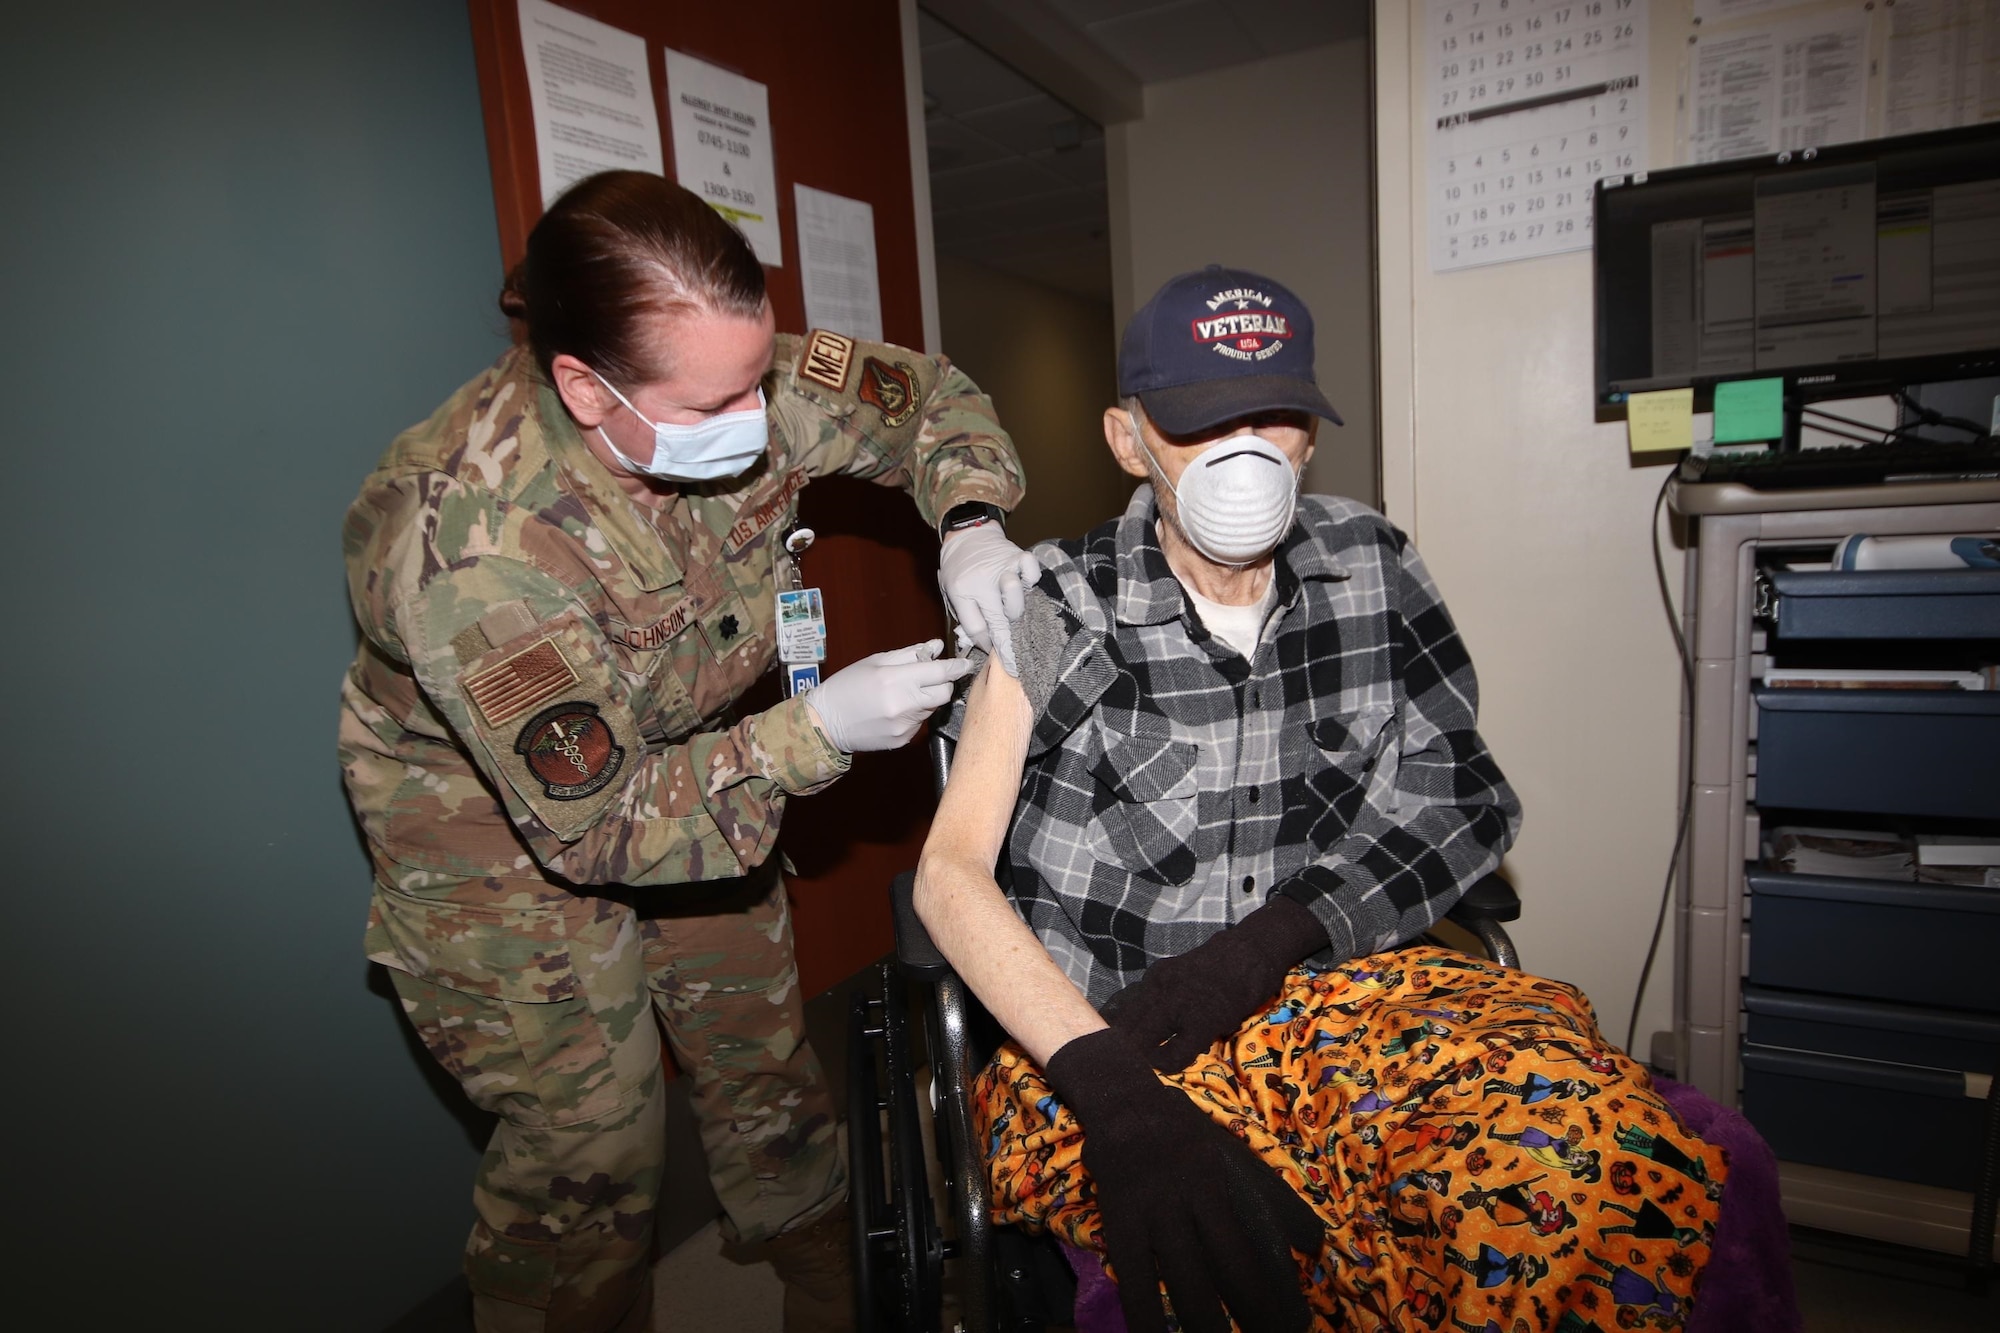 U.S. Air Force Lt. Col. Amy Johnson, the 673d Healthcare Operations Squadron Medicine Flight commander, administers the first of a two-dose series of a COVID-19 vaccine to a TRICARE beneficiary at Joint Base Elmendorf-Richardson, Alaska, Jan. 29, 2021. JBER is inoculating personnel following the Department of Defense’s prioritization guidelines. The vaccines are part of Operation Warp Speed, a national initiative to accelerate the development, production and distribution of safe and effective COVID-19 vaccines, therapeutics and diagnostics.